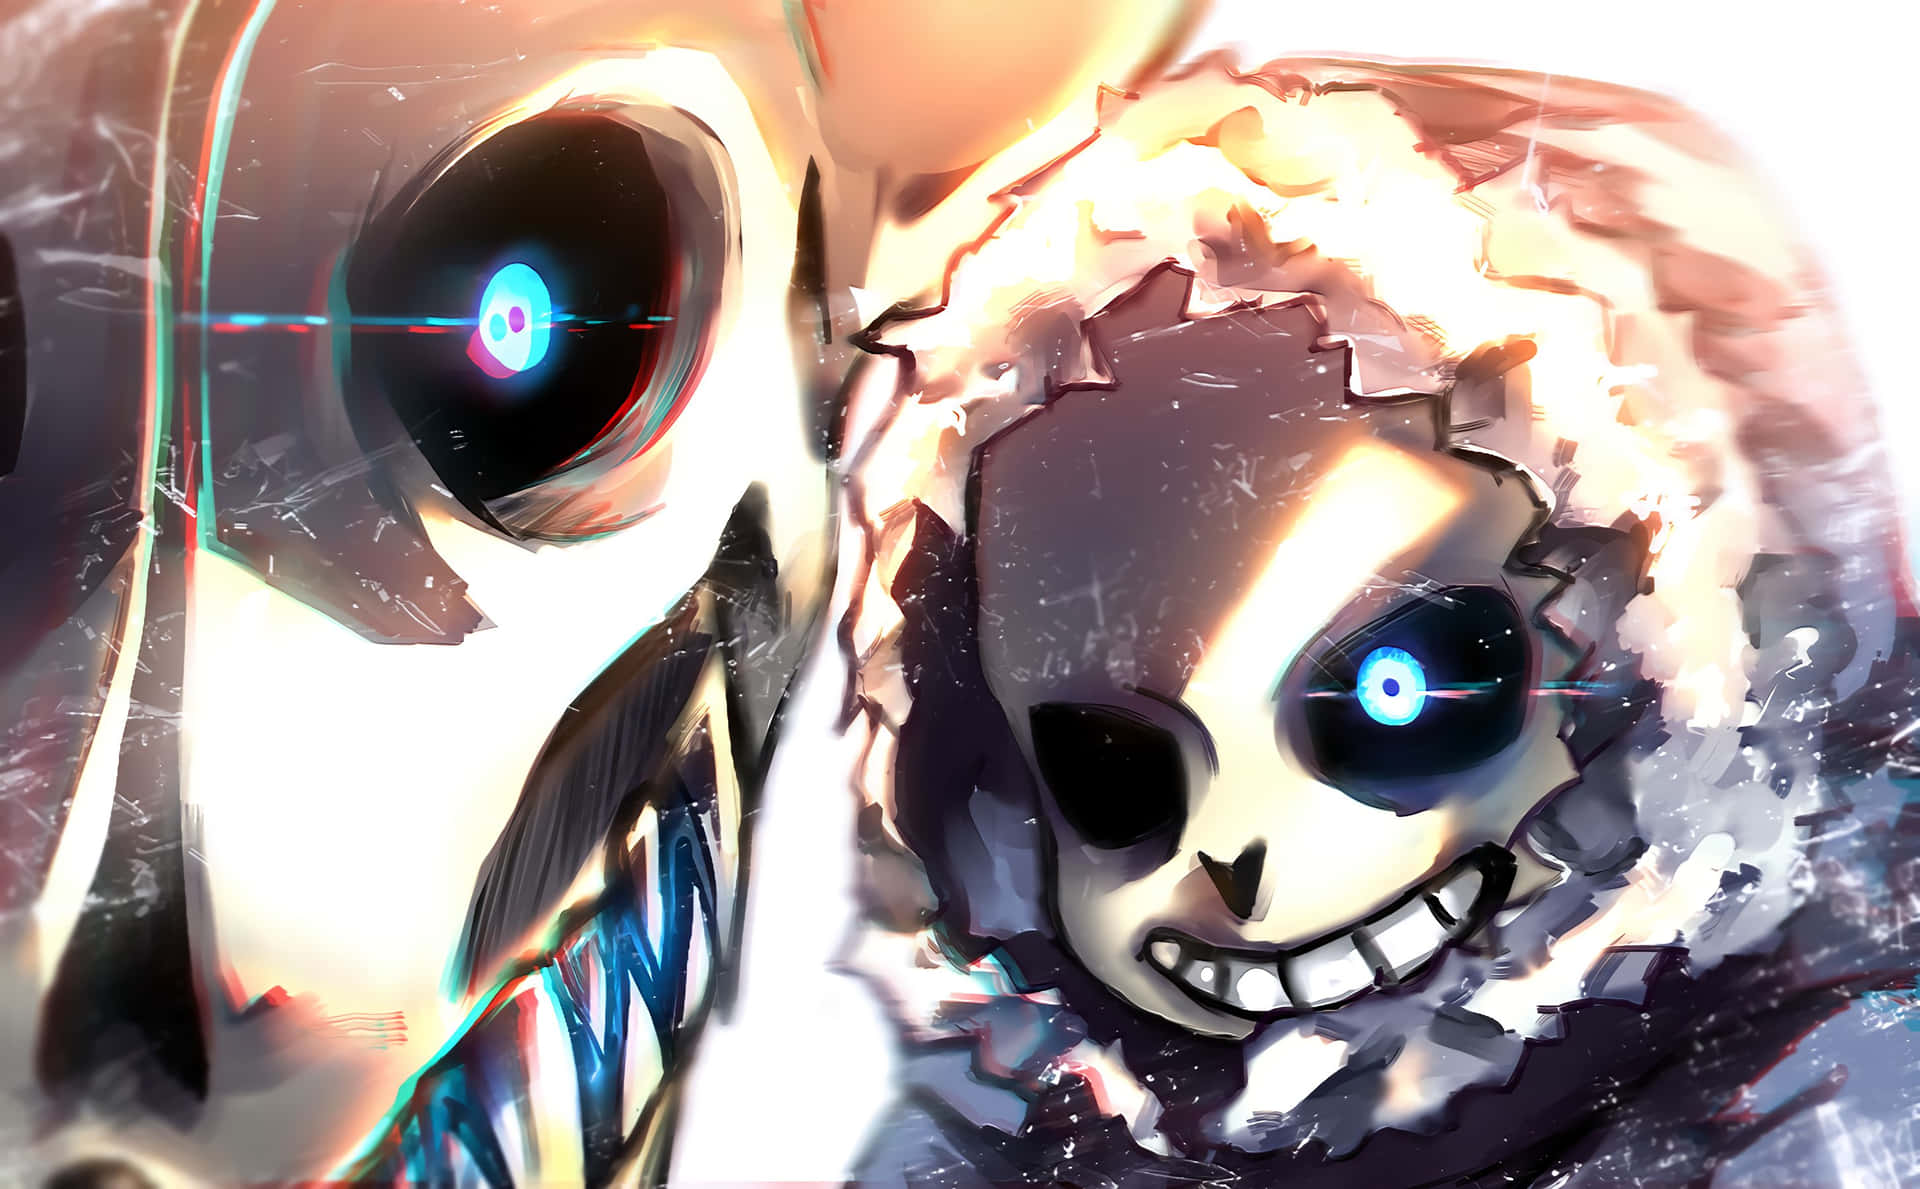 "Call it a dream or call it a nightmare, but no amount of planning could have prepared me for this moment." - Sans (Undertale) Wallpaper